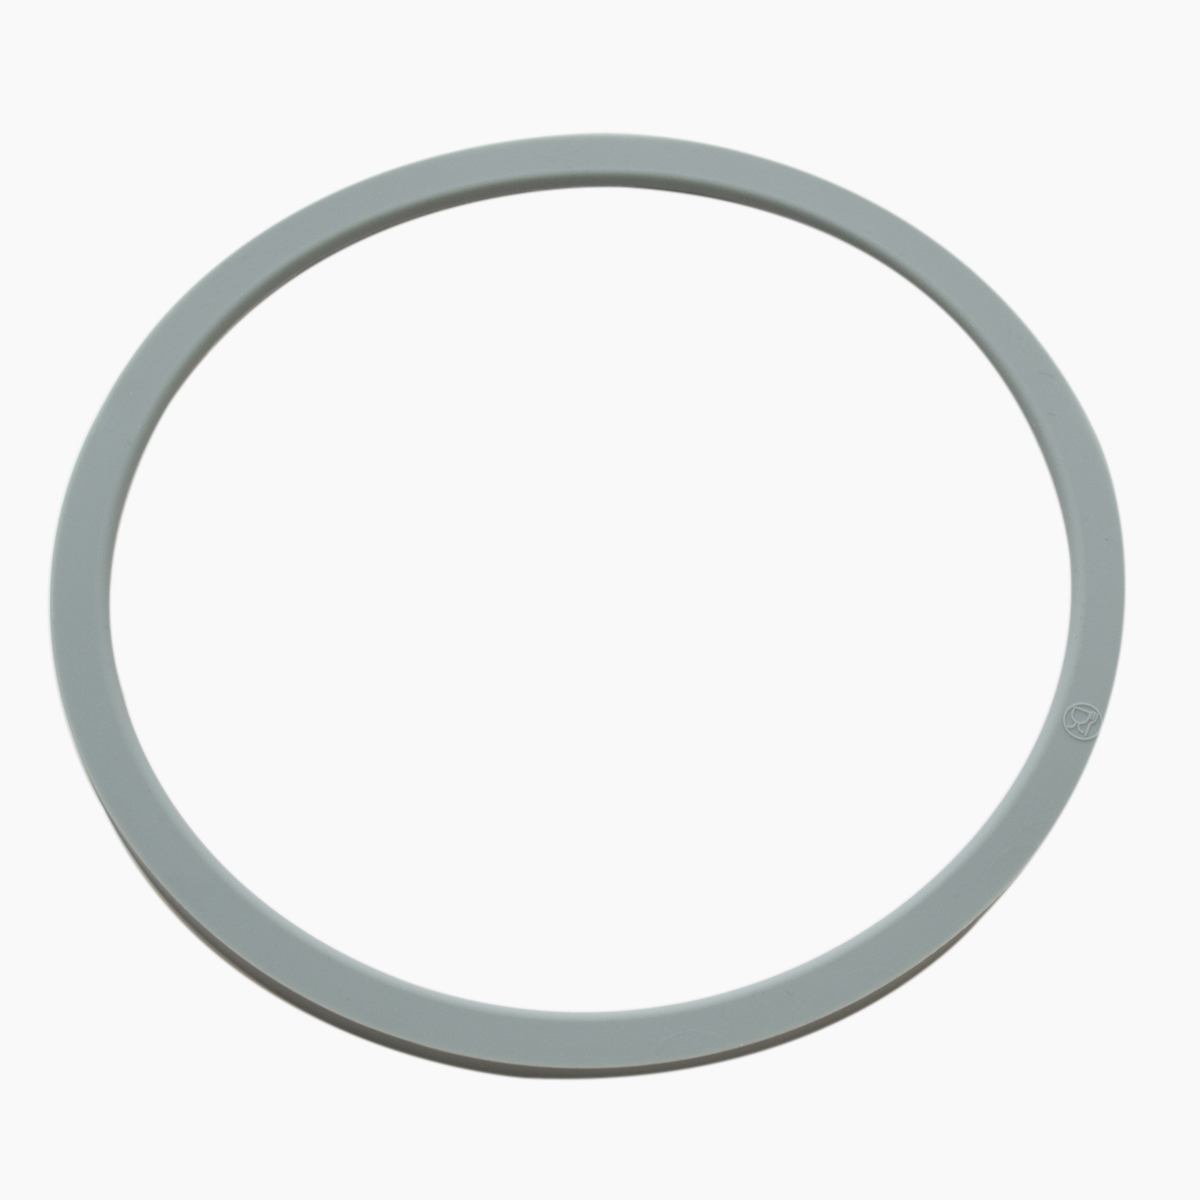 Soft And Deformable Replacement Bimby Thermomix VORWERK TM21 Blender Parts of Cooking Machine TM 21 Seal Gasket Ring Accessories